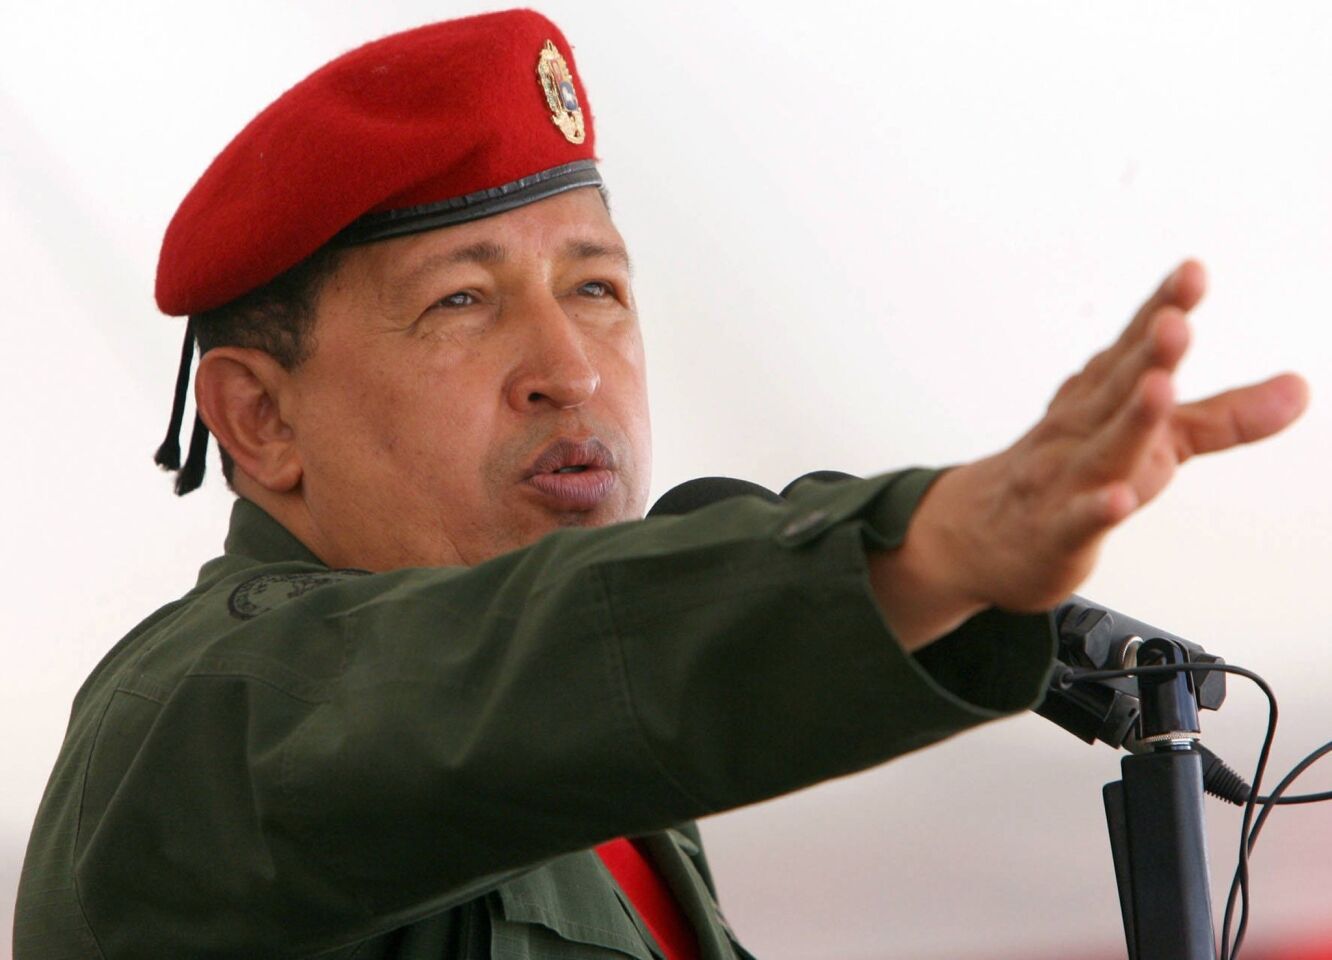 Love him or hate him, Venezuelan President Hugo Chavez, who died of cancer in March, was one of the most influential figures in Latin America in recent years. The former paratrooper-turned-president used his country's vast oil wealth to improve life for the poor in Venezuela, reducing the percentage of people living in extreme poverty as well as illiteracy rates. And his decision to establish Petrocaribe, an alliance whereby Venezuela ships petroleum to other nations, such as Haiti, at below-market prices, helped combat poverty abroad. But even as he pushed more resources toward improving the lives of the region's have-nots, he also used his power to attack critics and censored the media, as well as to consolidate his hold on power. His death has created uncertainty at home and abroad. His successor, Nicolas Maduro, has struggled to stabilize the country's economic troubles, raising doubts about the future of Petrocaribe. Above: Chavez gives a speech in 2006. RELATED: Ted Rall's five best cartoons of 2013 Washington's 5 biggest 'fails' of 2013 2013 endings: Columnist Patt Morrison on what she won't miss